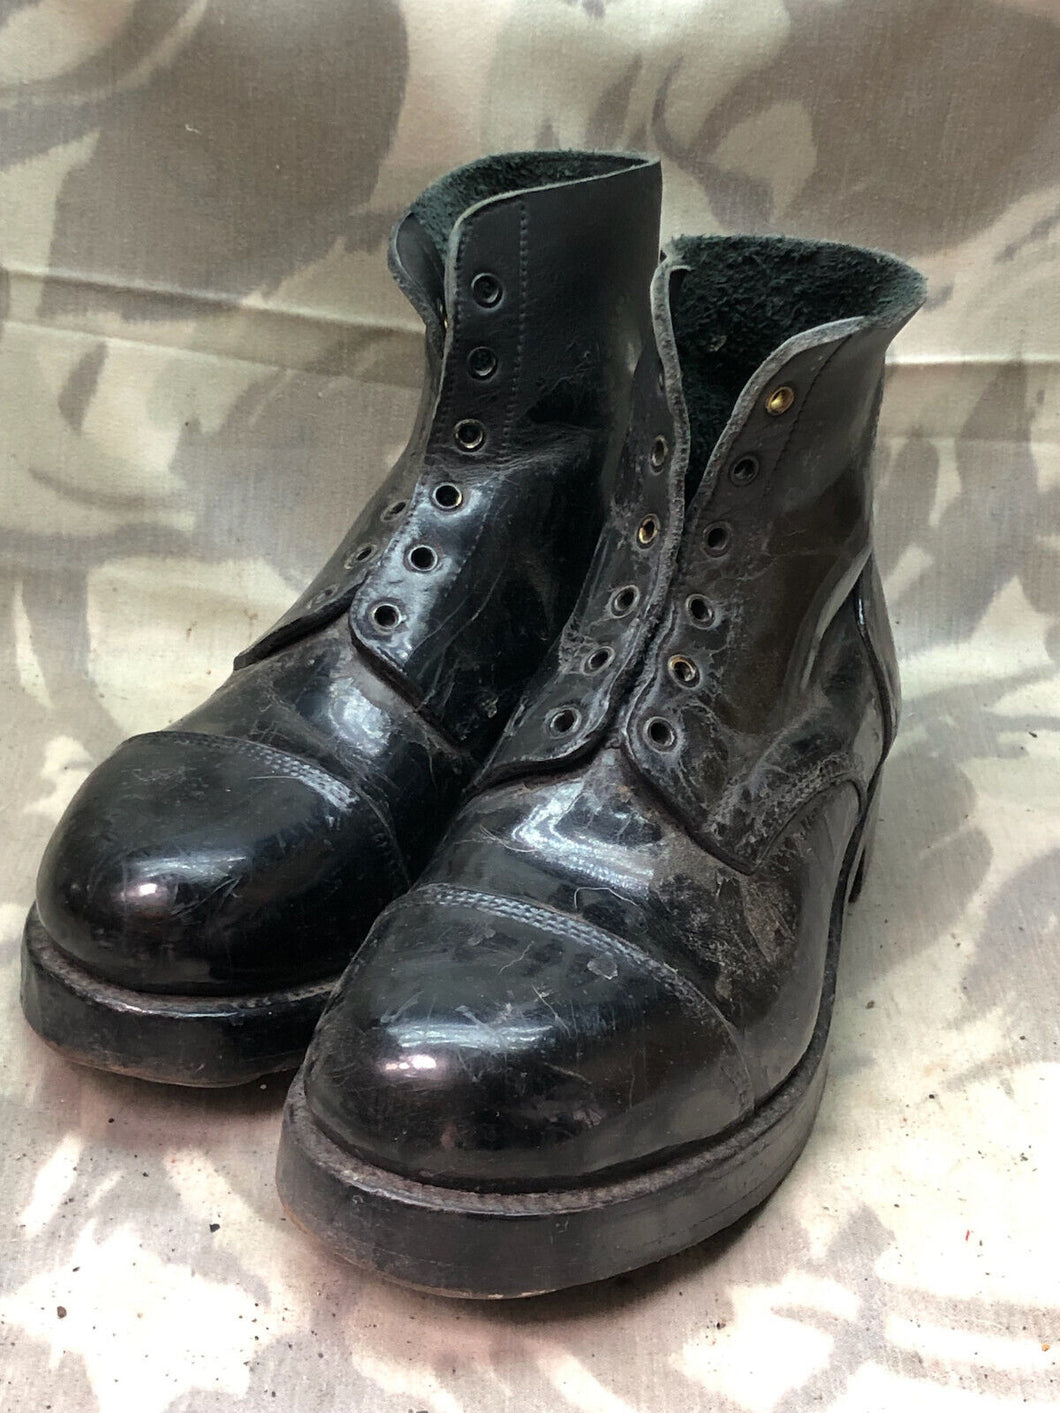 Original British Army Hobnailed Soldiers Ankle Ammo Boots WW2 Style - Size 6